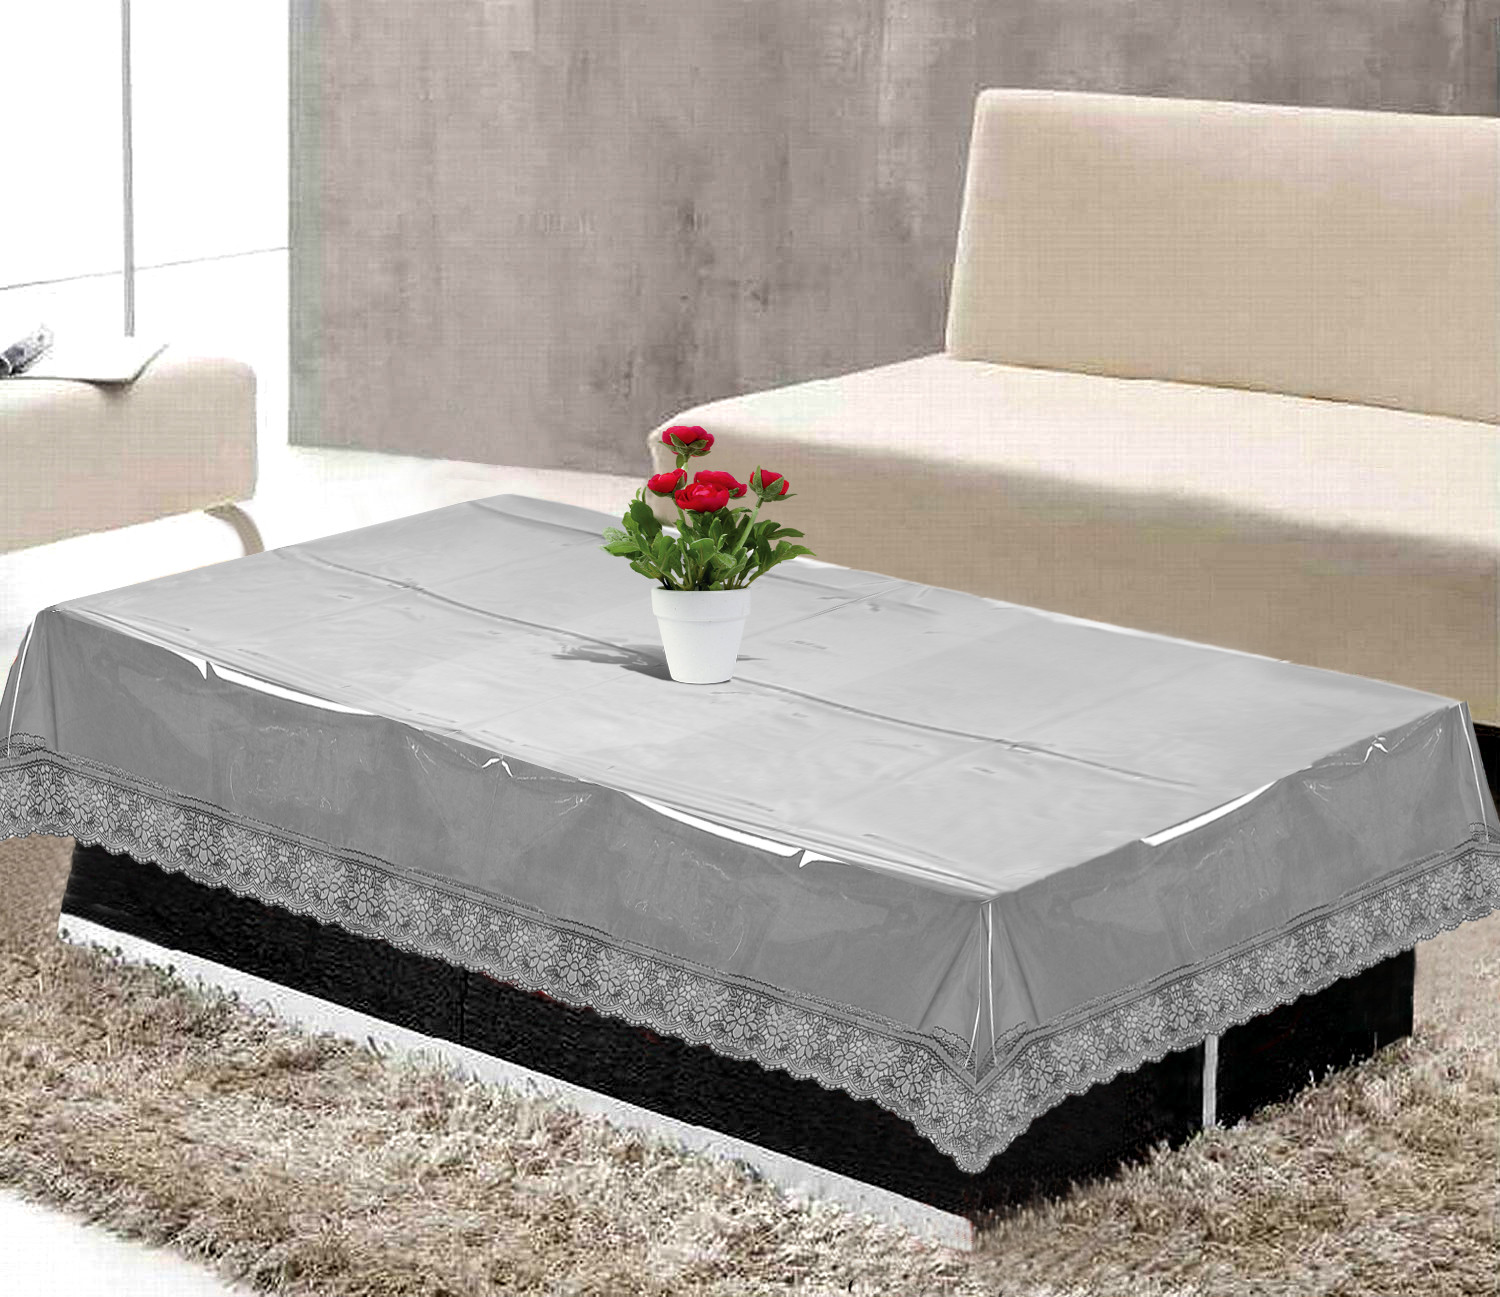 Kuber Industries PVC 4 Seater Center Table Cover With Silver Lace Border 40